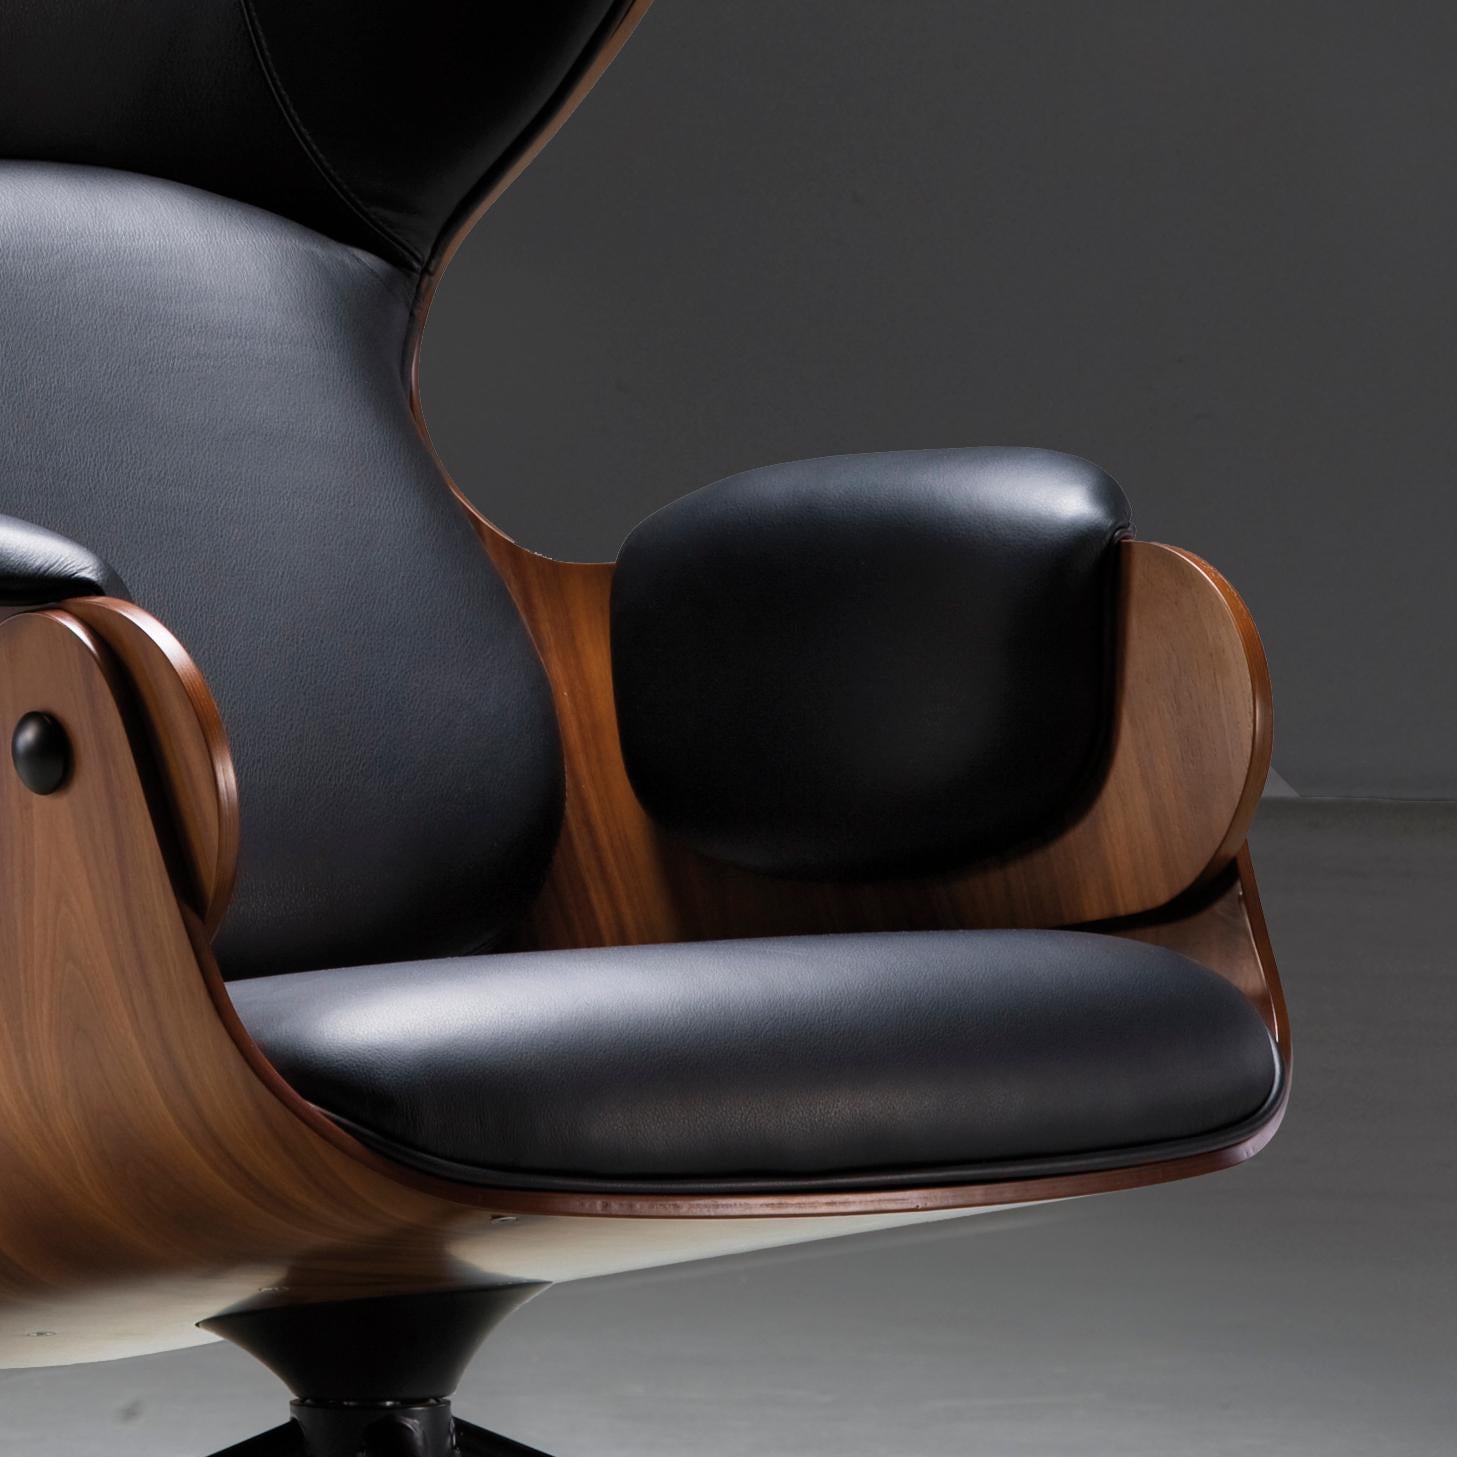 Jaime Hayon, Contemporary, Leather Upholstery Lounger Armchair for BD In New Condition For Sale In Barcelona, Barcelona